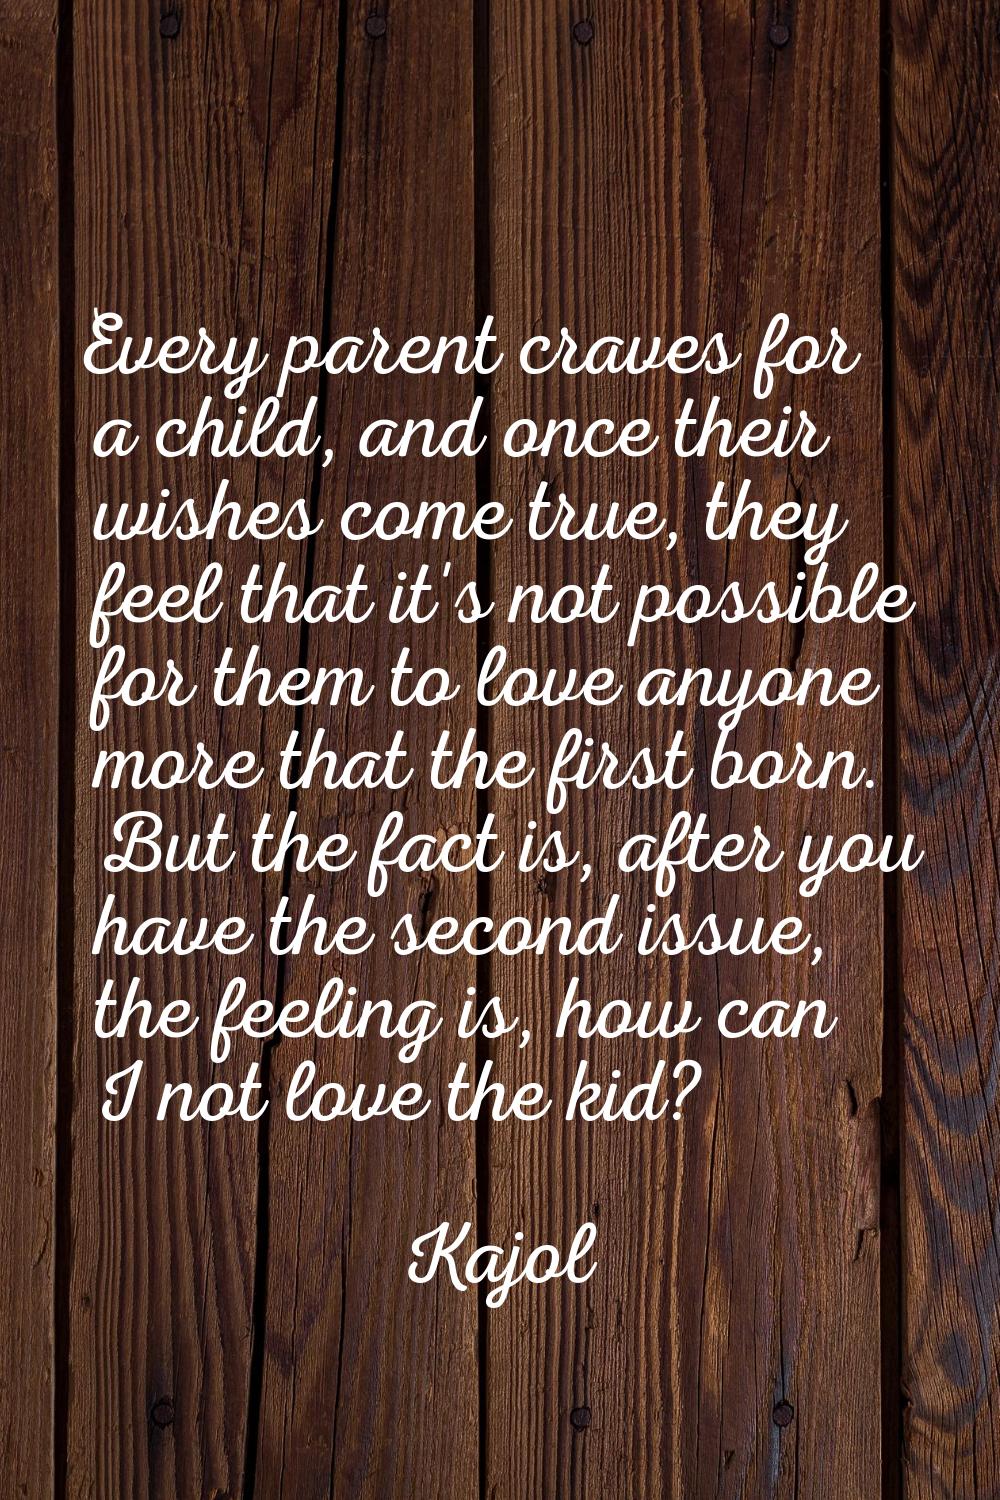 Every parent craves for a child, and once their wishes come true, they feel that it's not possible 